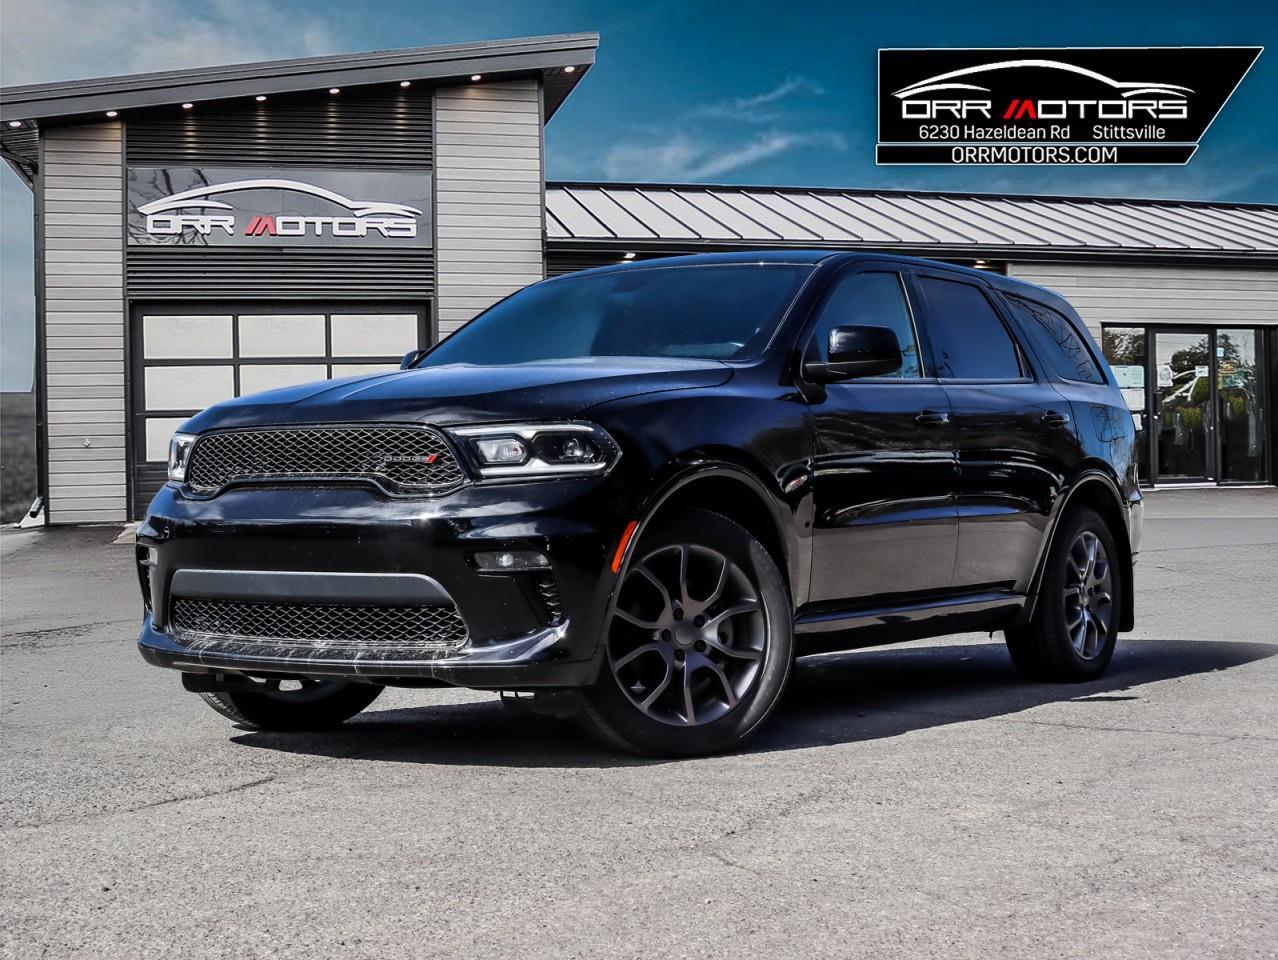 2022 Dodge Durango SXT SOLD CERTIFIED AND IN EXCELLENT CONDITION!